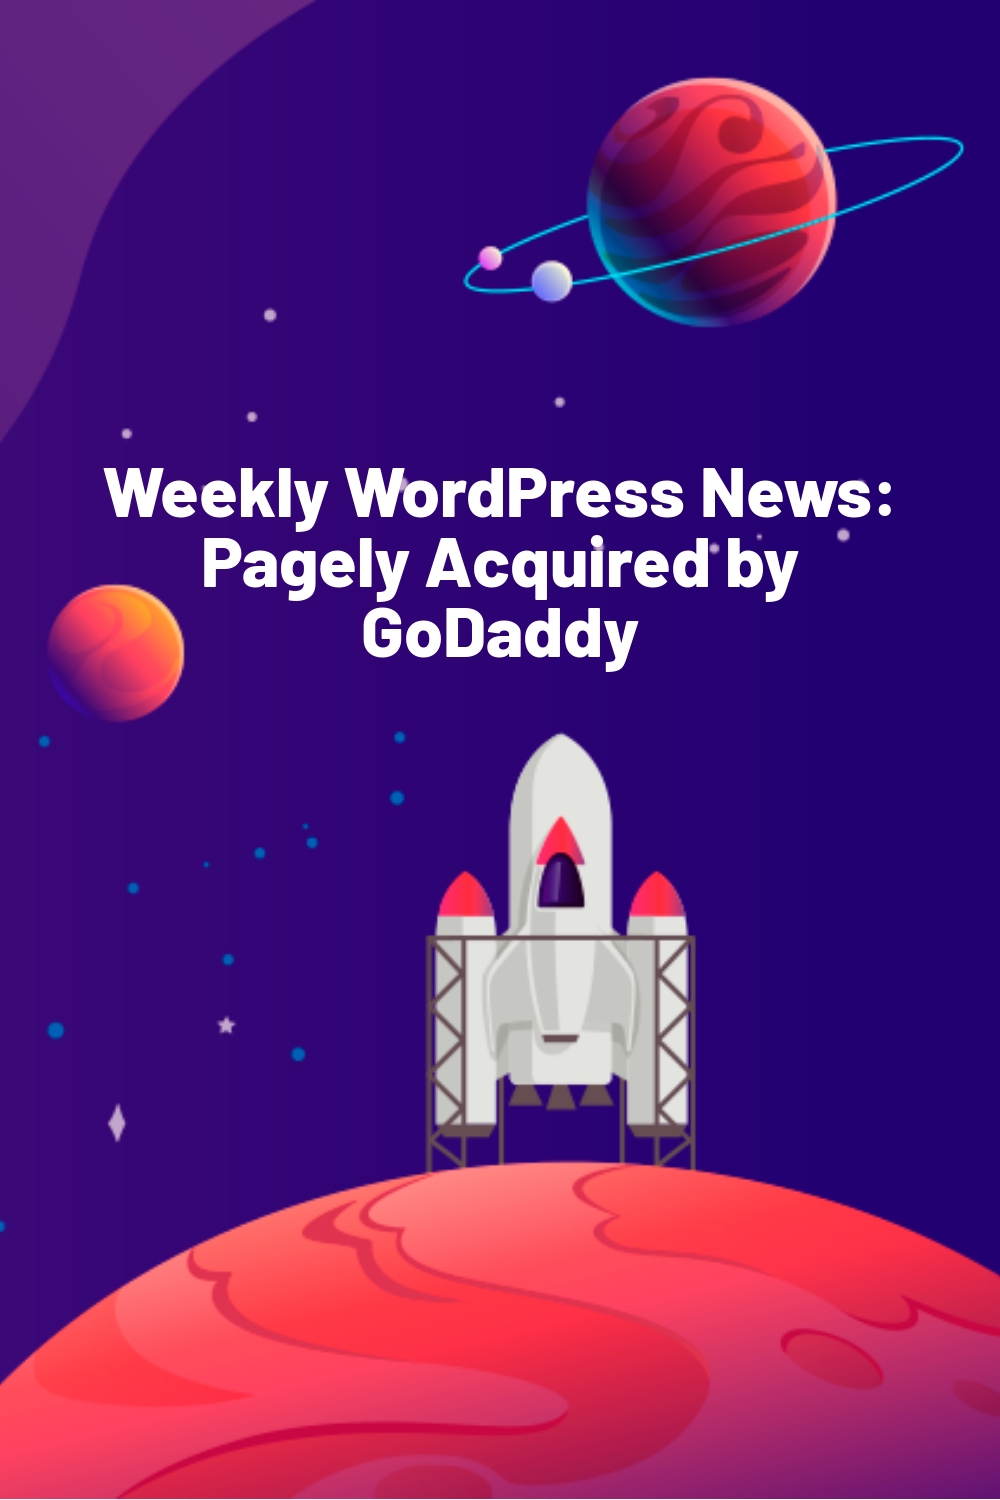 Weekly WordPress News: Pagely Acquired by GoDaddy